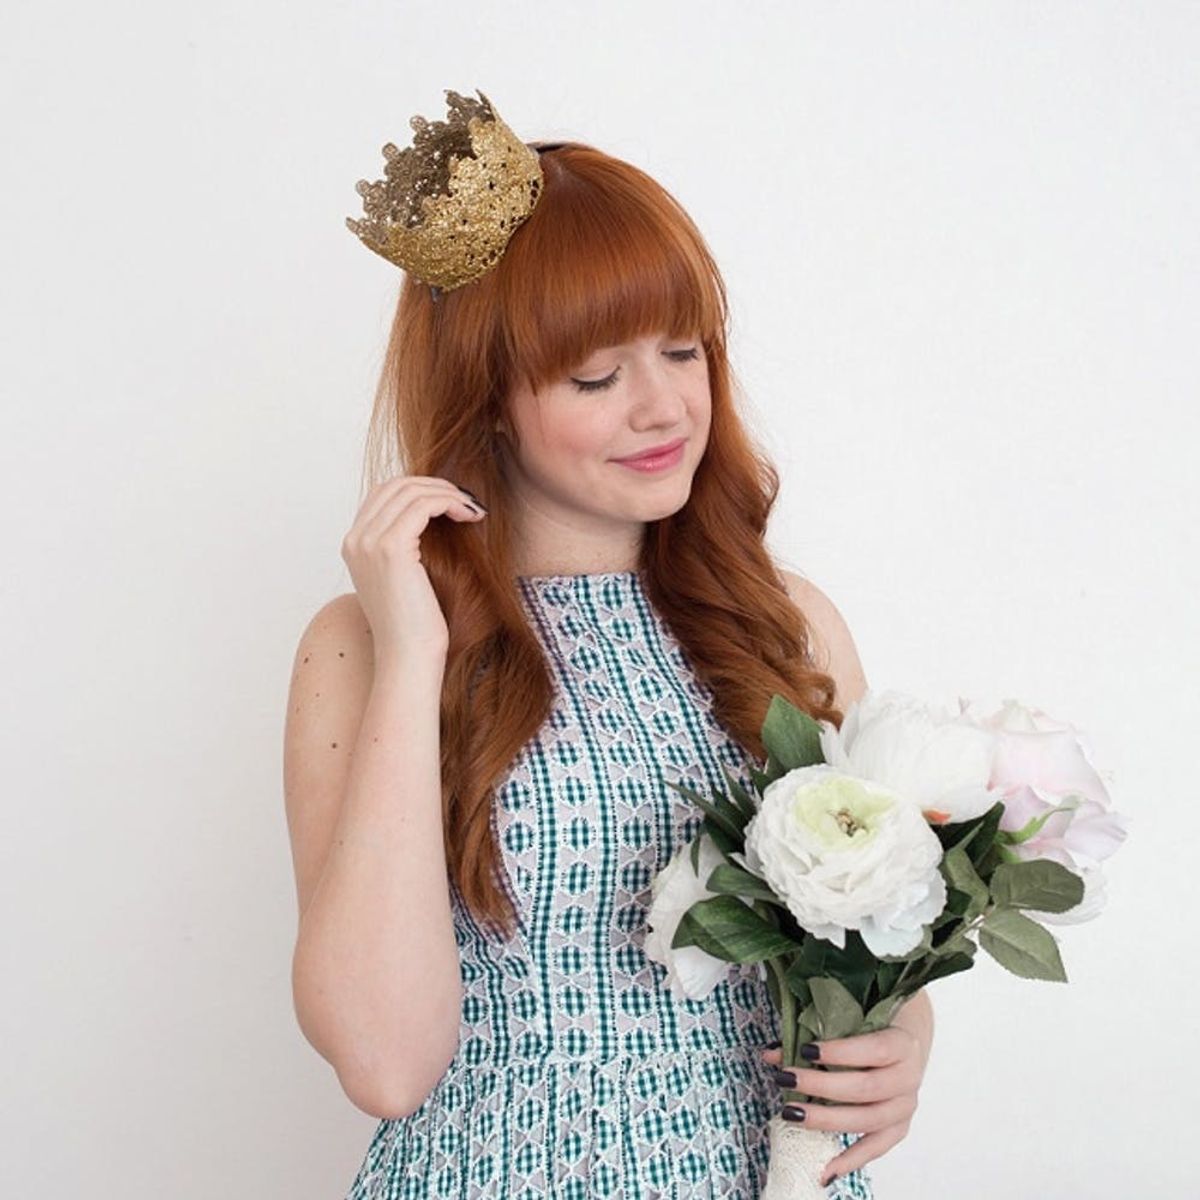 How to Make a Tiara You’ll Want to Wear Every Day